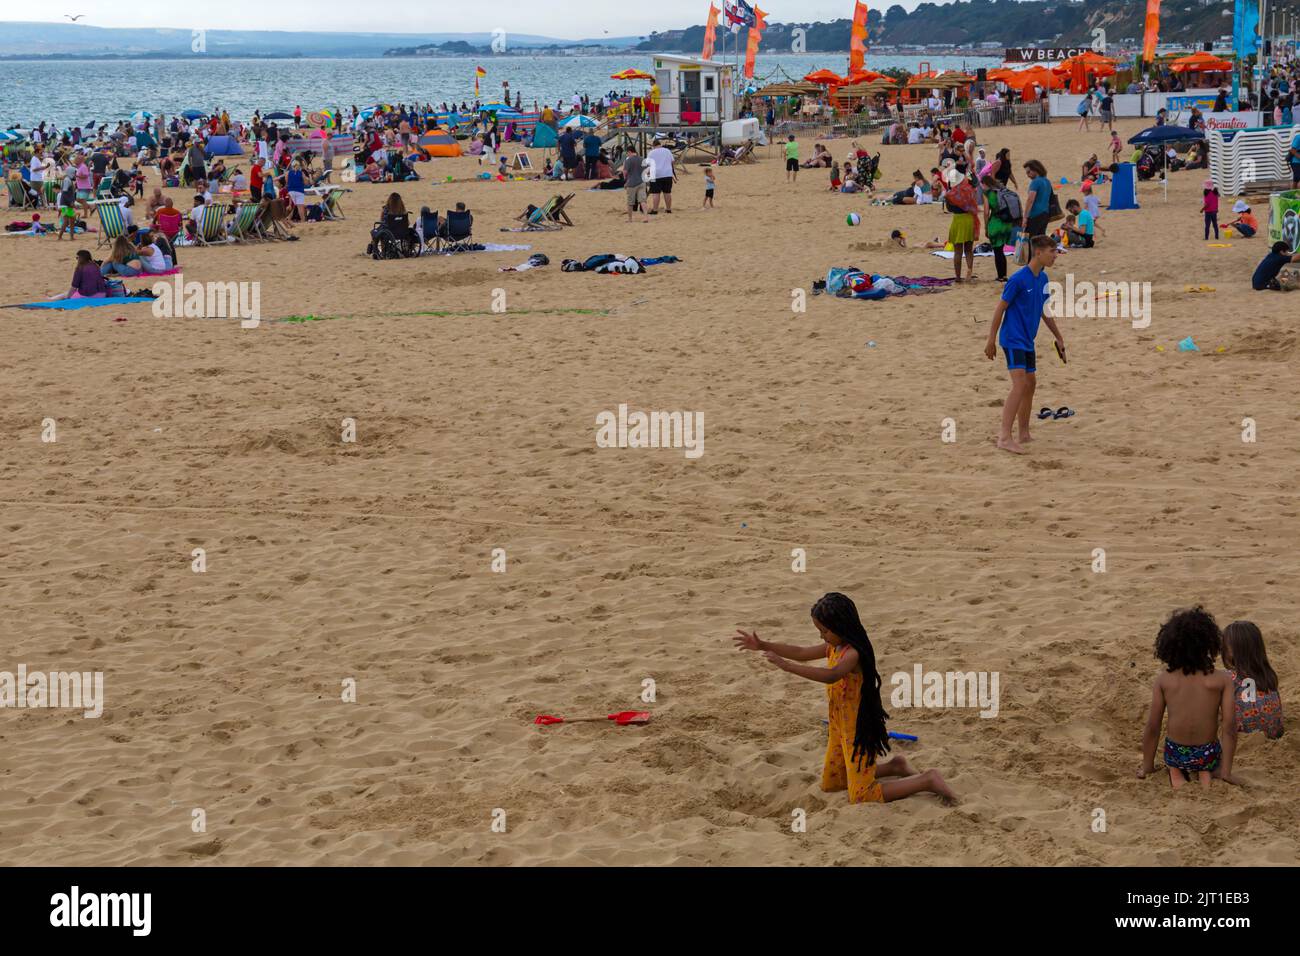 Bournemouth, Dorset UK. 27th August 2022. UK weather: Crowds flock to Bournemouth beach on a warm sunny day to enjoy the sunshine at the seaside for the start of the long Bank Holiday weekend. Credit: Carolyn Jenkins/Alamy Live News Stock Photo